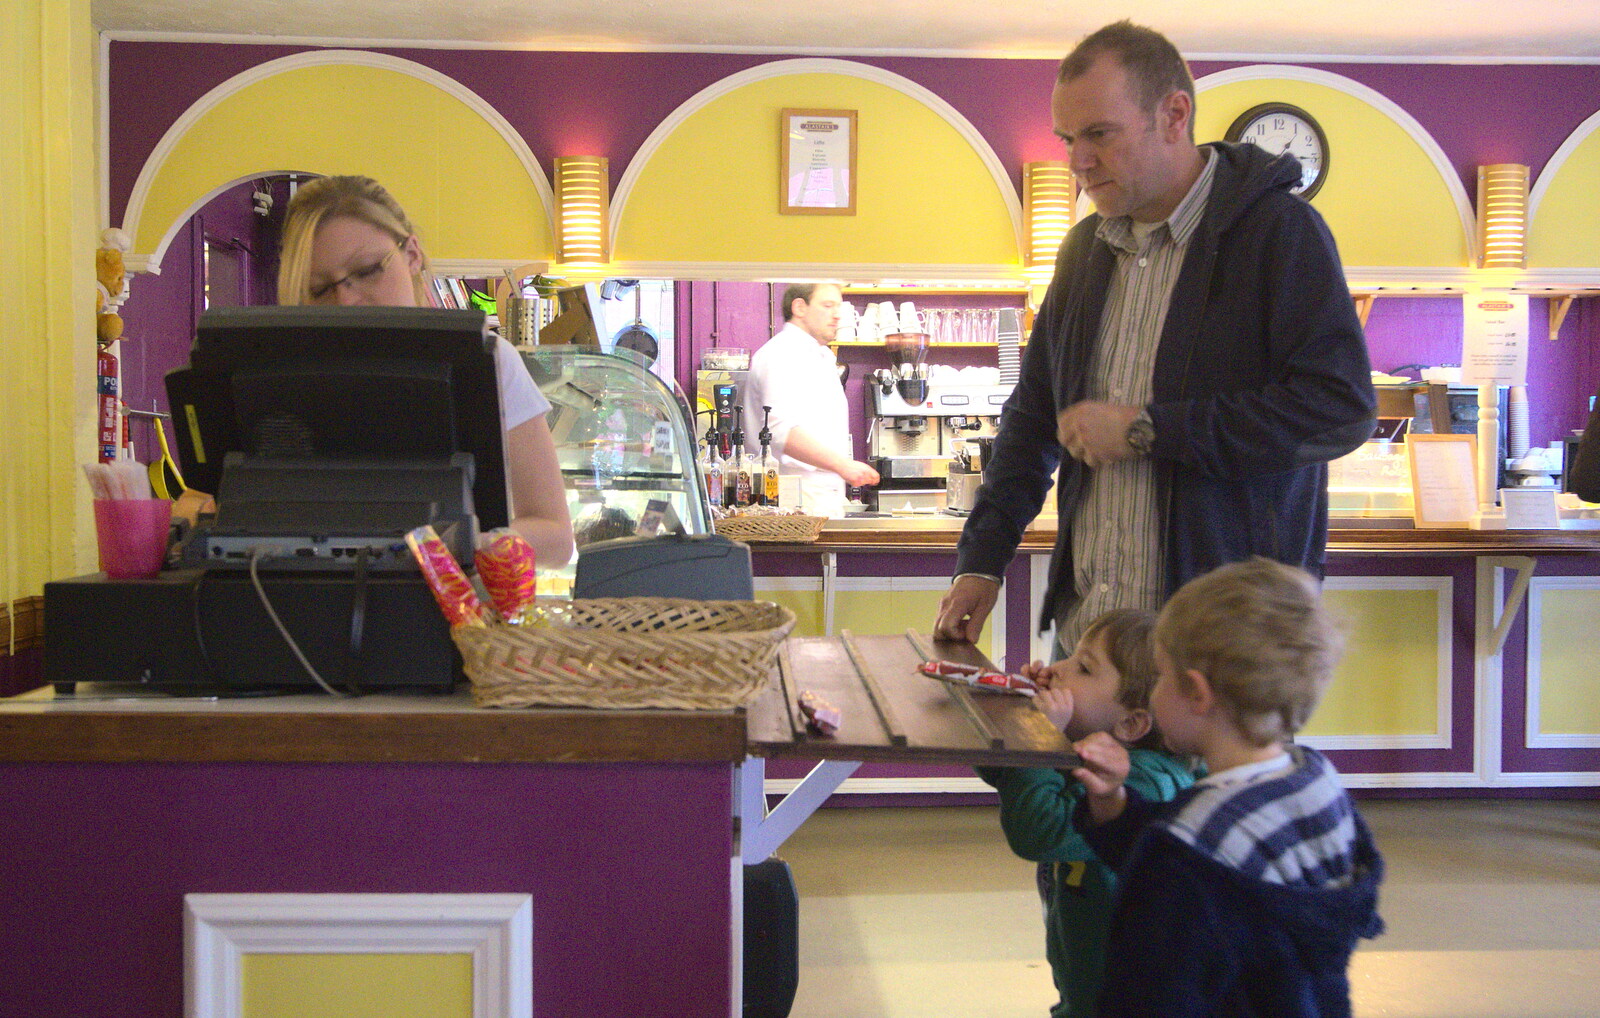 Kaine and Fred buy more snacks from A Day at Bressingham Steam and Gardens, Diss, Norfolk - 18th May 2013